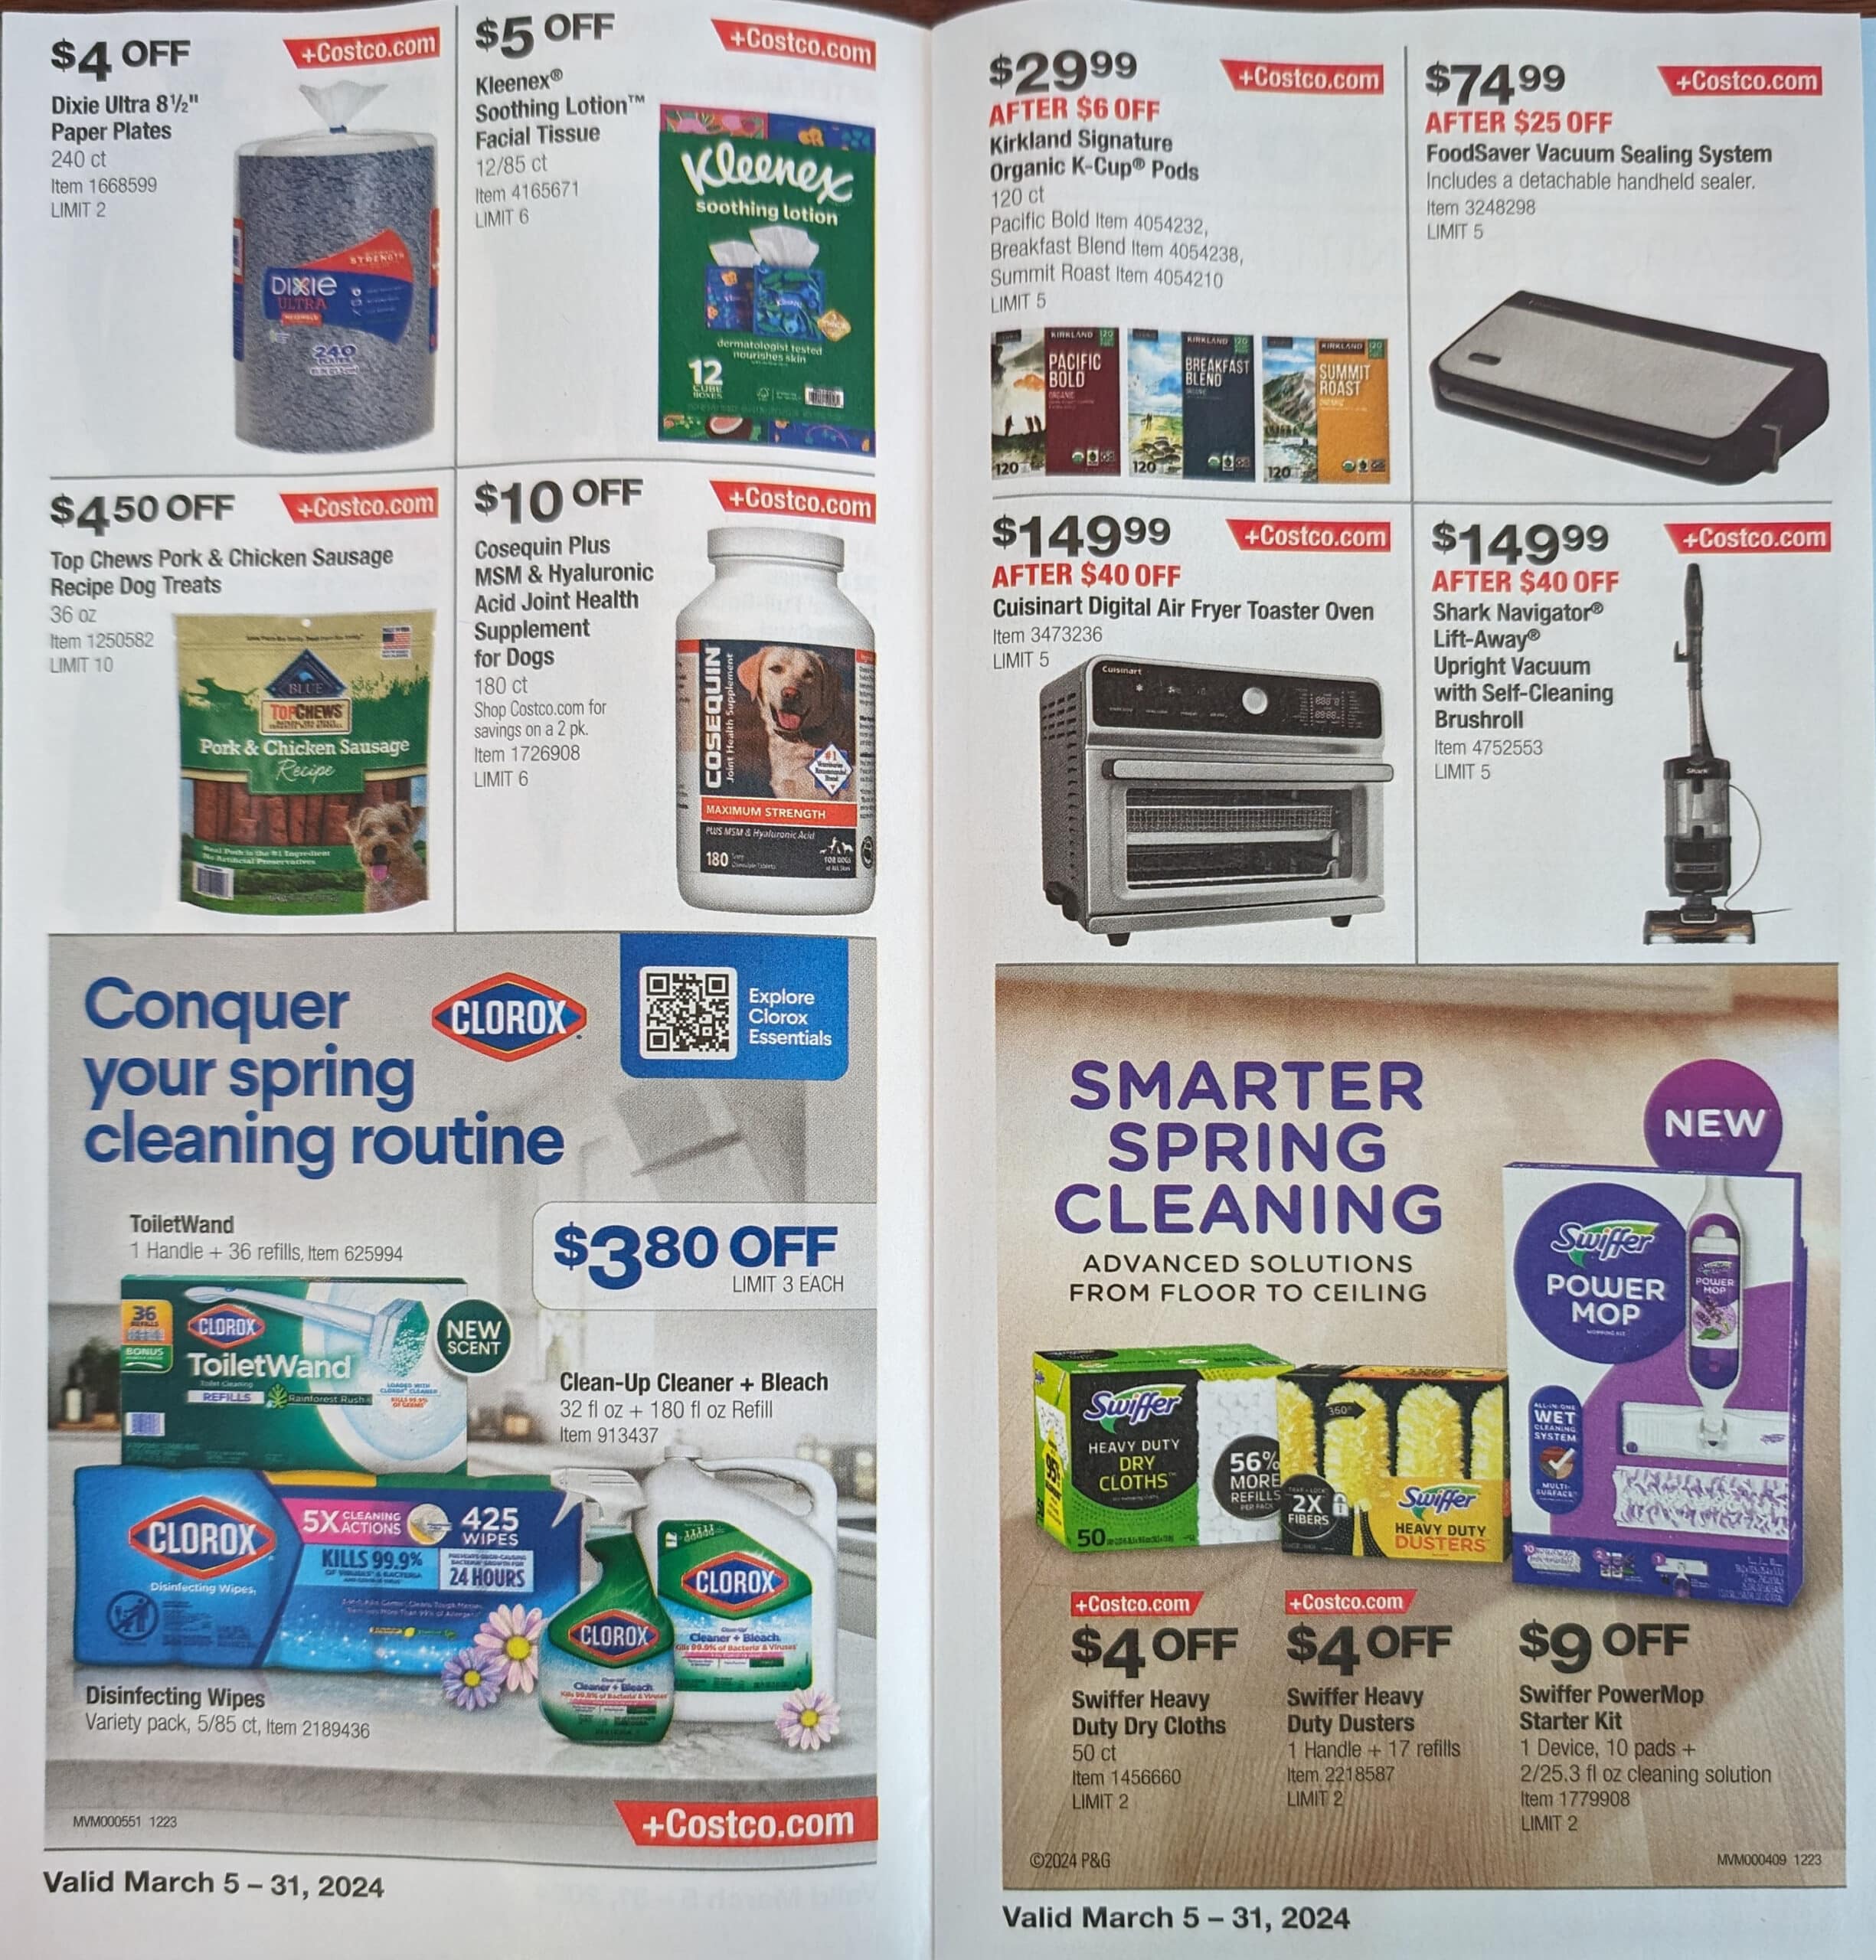 Costco Flyer & Costco Sale Items for July 19-25, 2021, for BC, AB, SK, MB -  Costco West Fan Blog